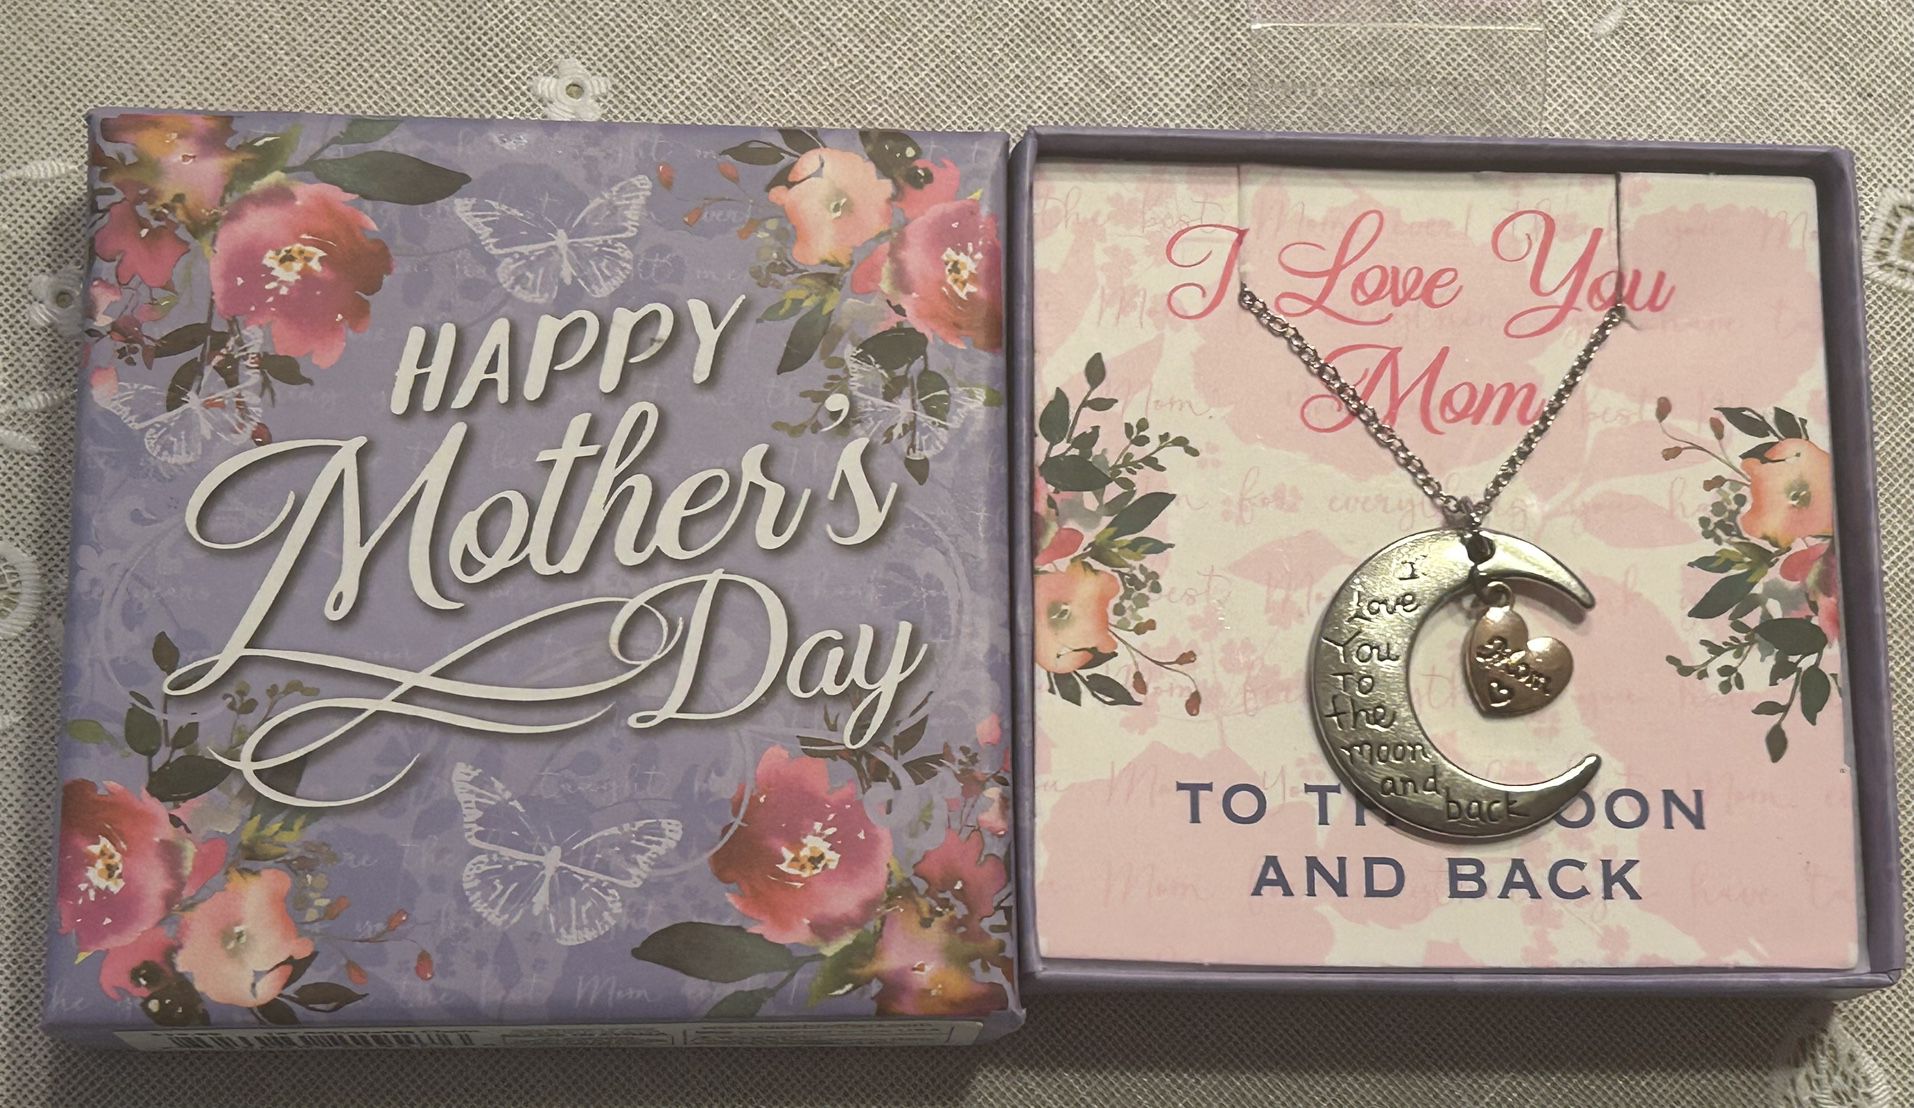 NEW “I LOVE YOU TO THE MOON &BACK MOM” 18” Silver & Rose Plate Adjustable Chain Necklace-Mothers Day